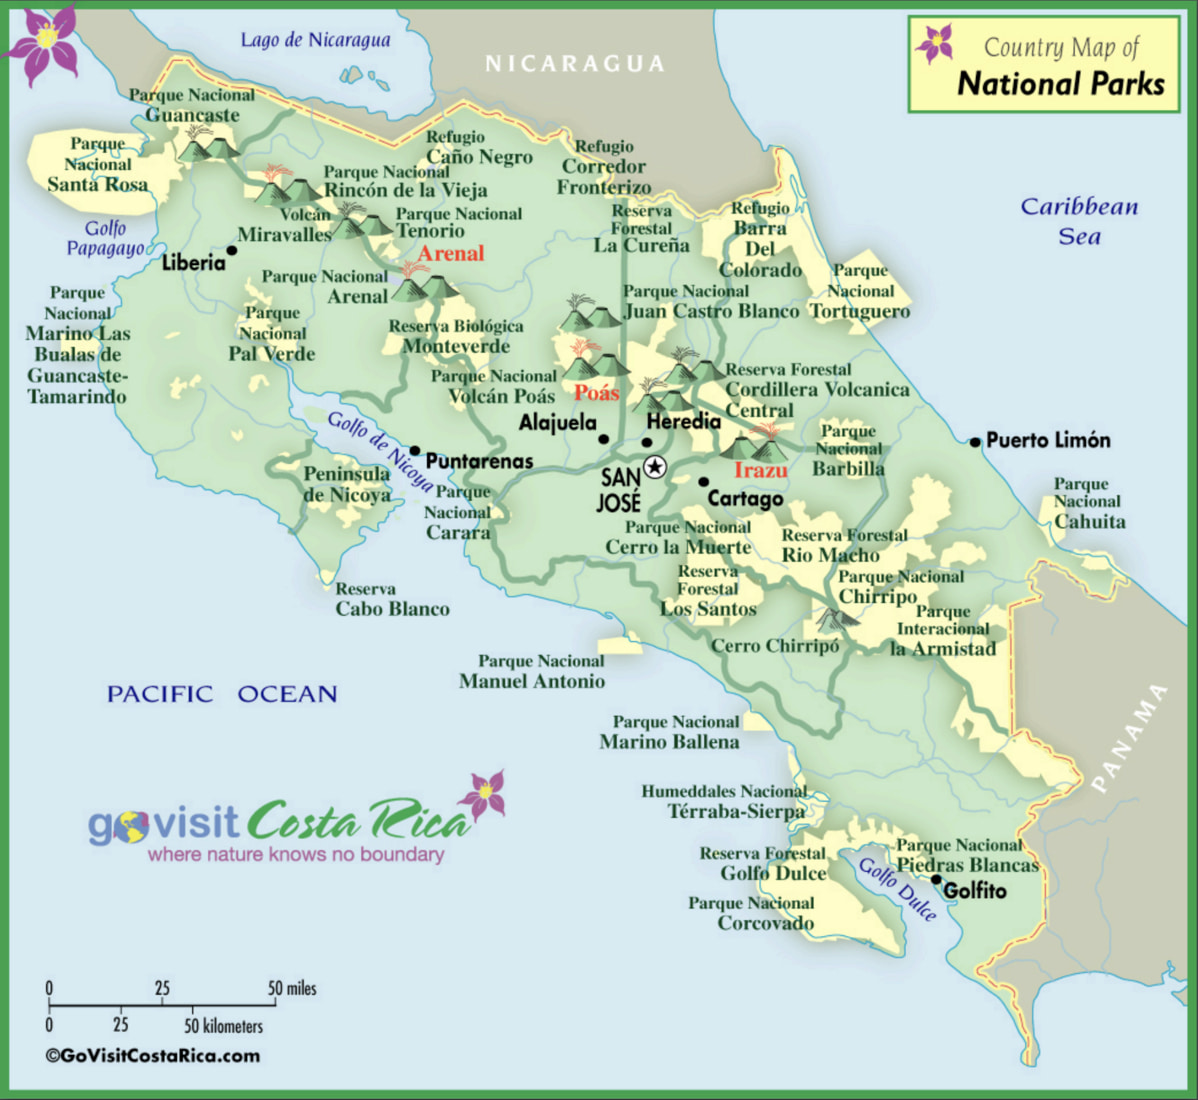 Map of national parks in Costa Rica